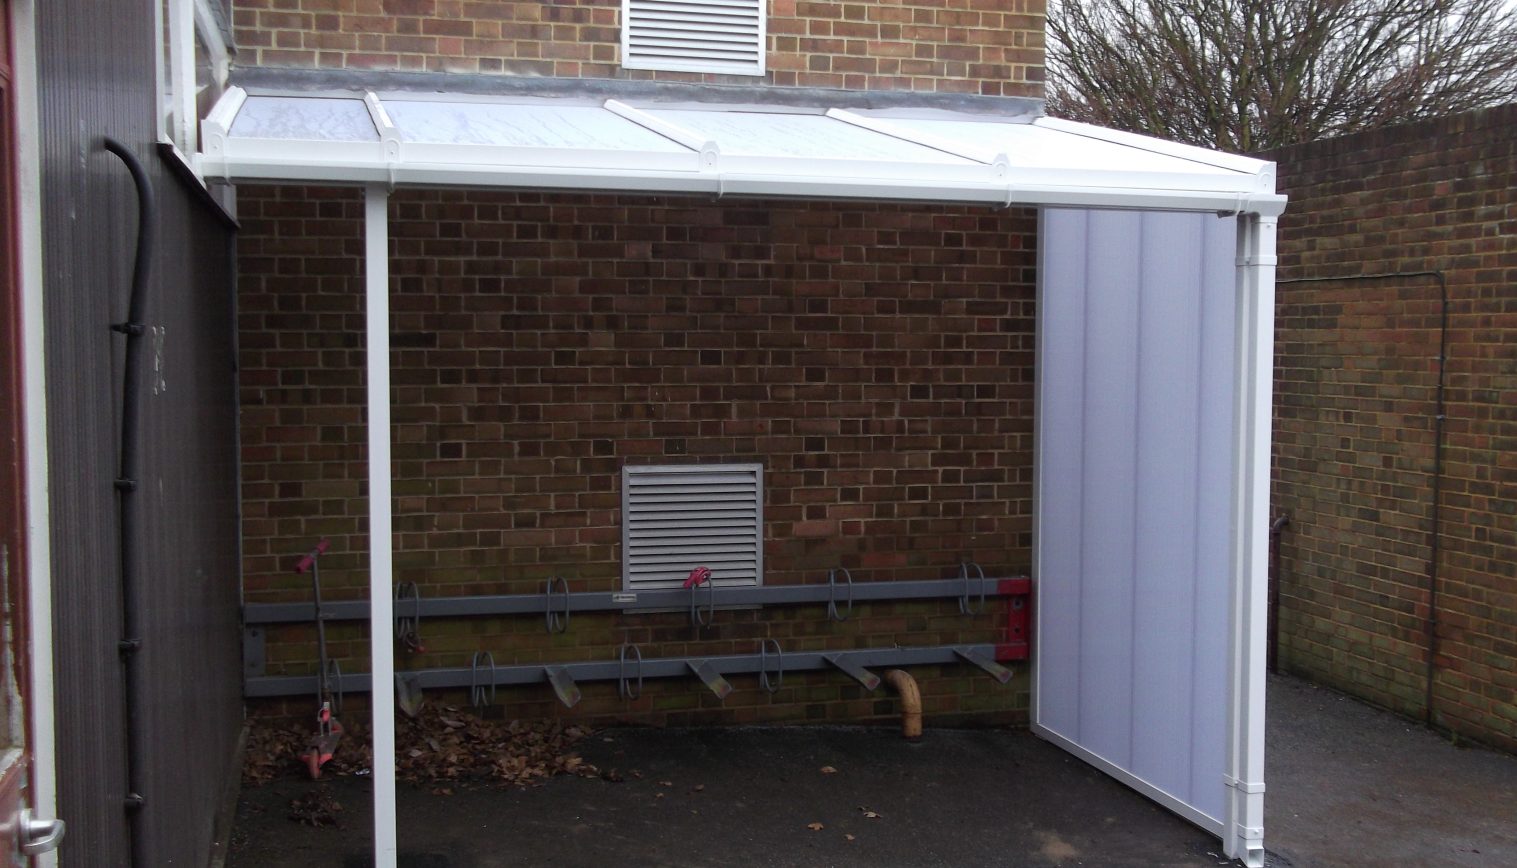 The Downs CE Primary School – Cycle Shelter – Third Installation